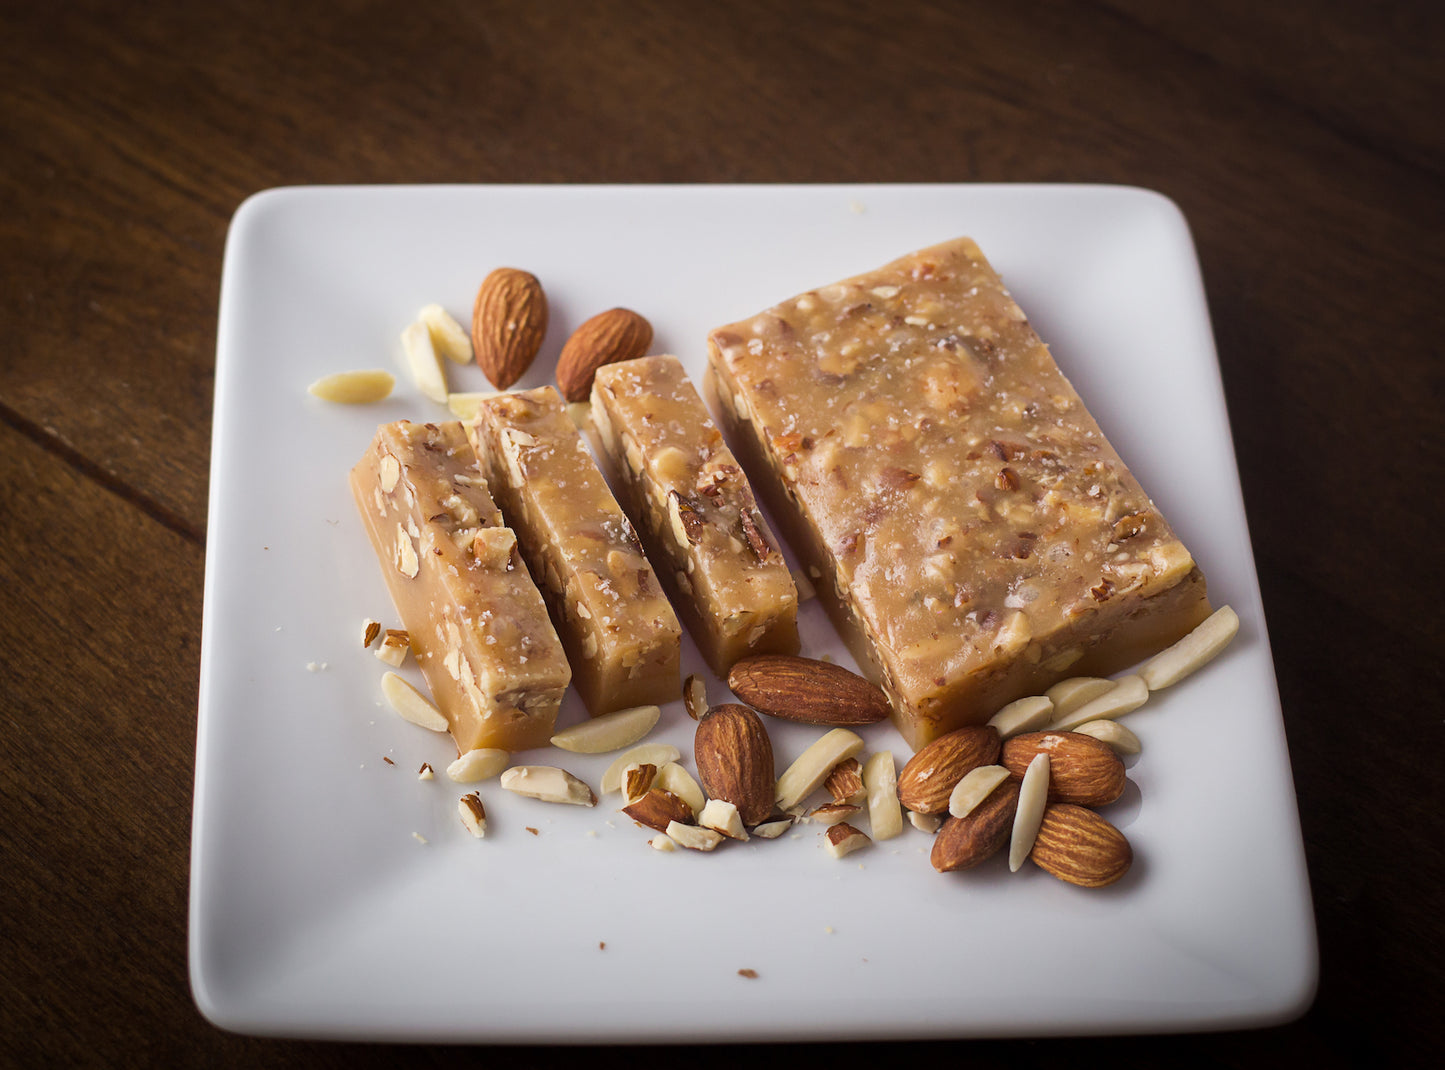 Almond Caramel Delight: The Ultimate Handcrafted Caramel Treat